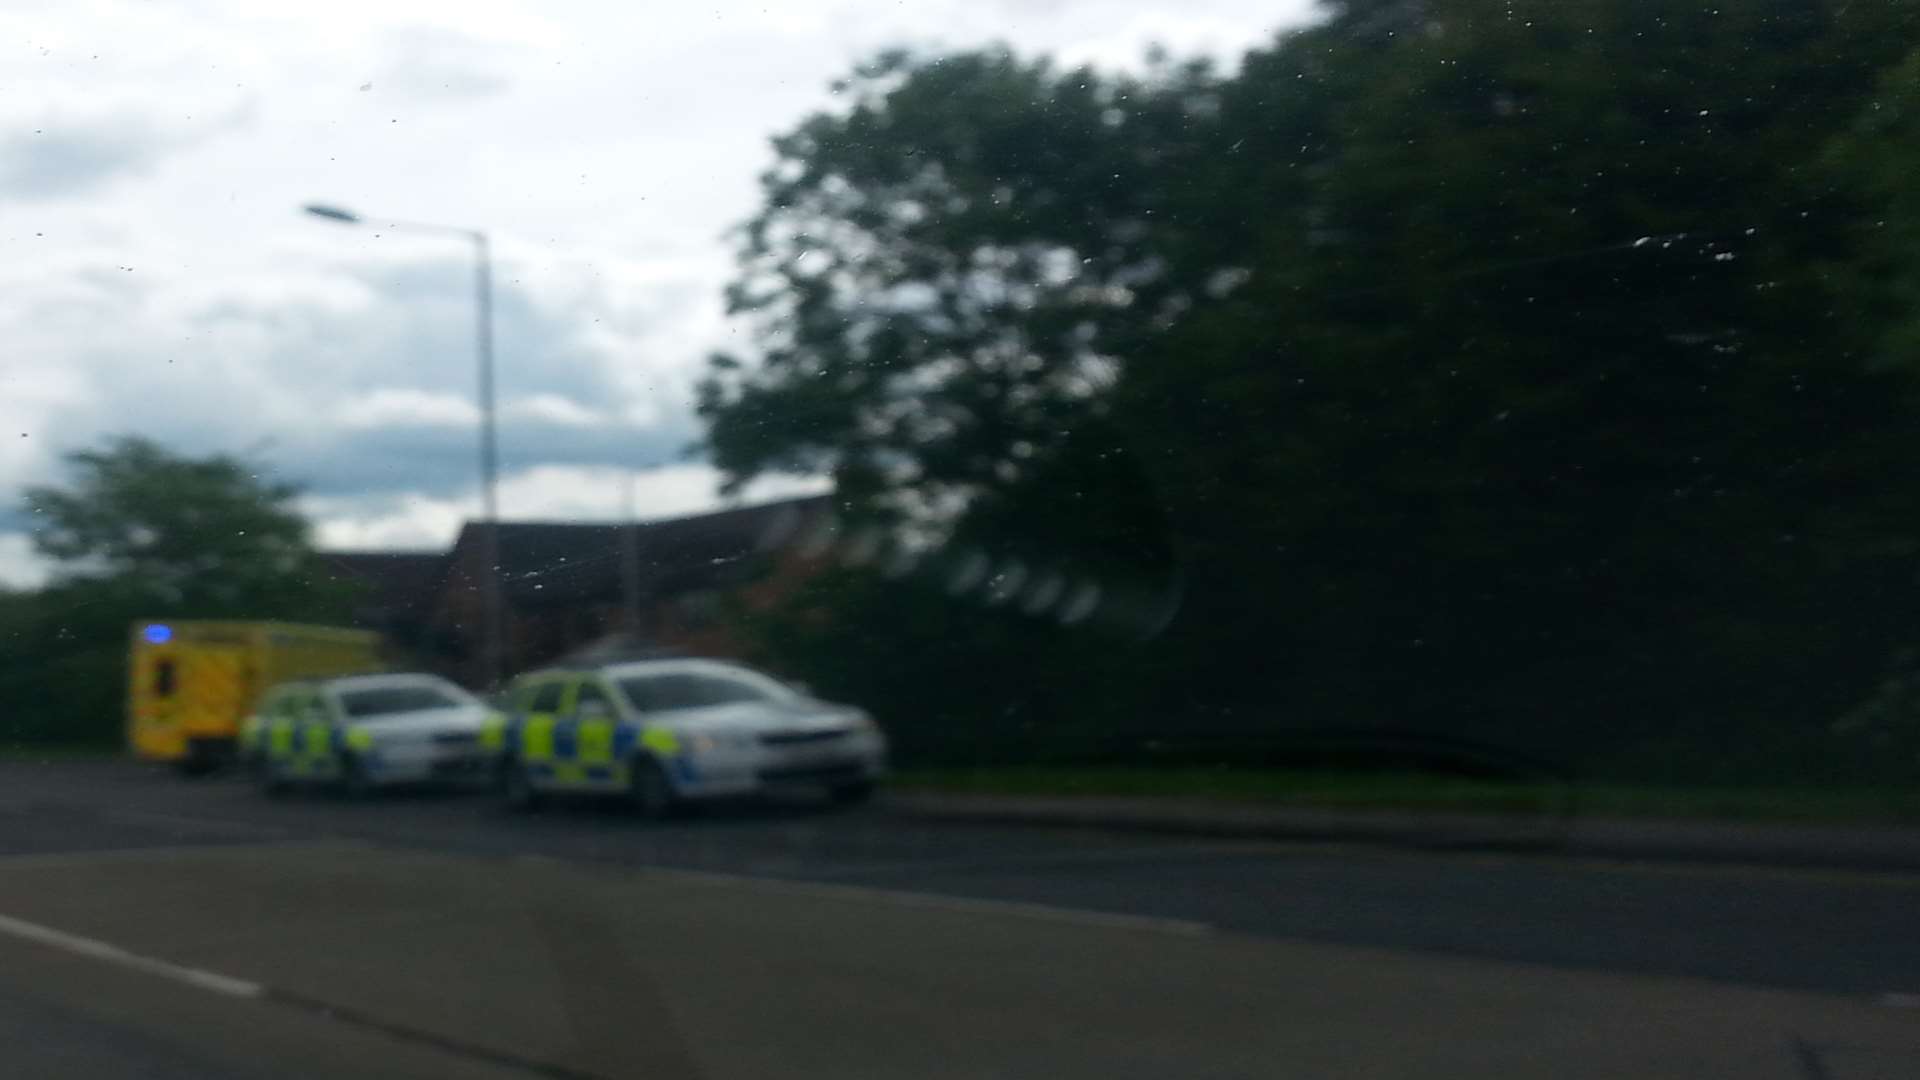 Kent Police attended the crash